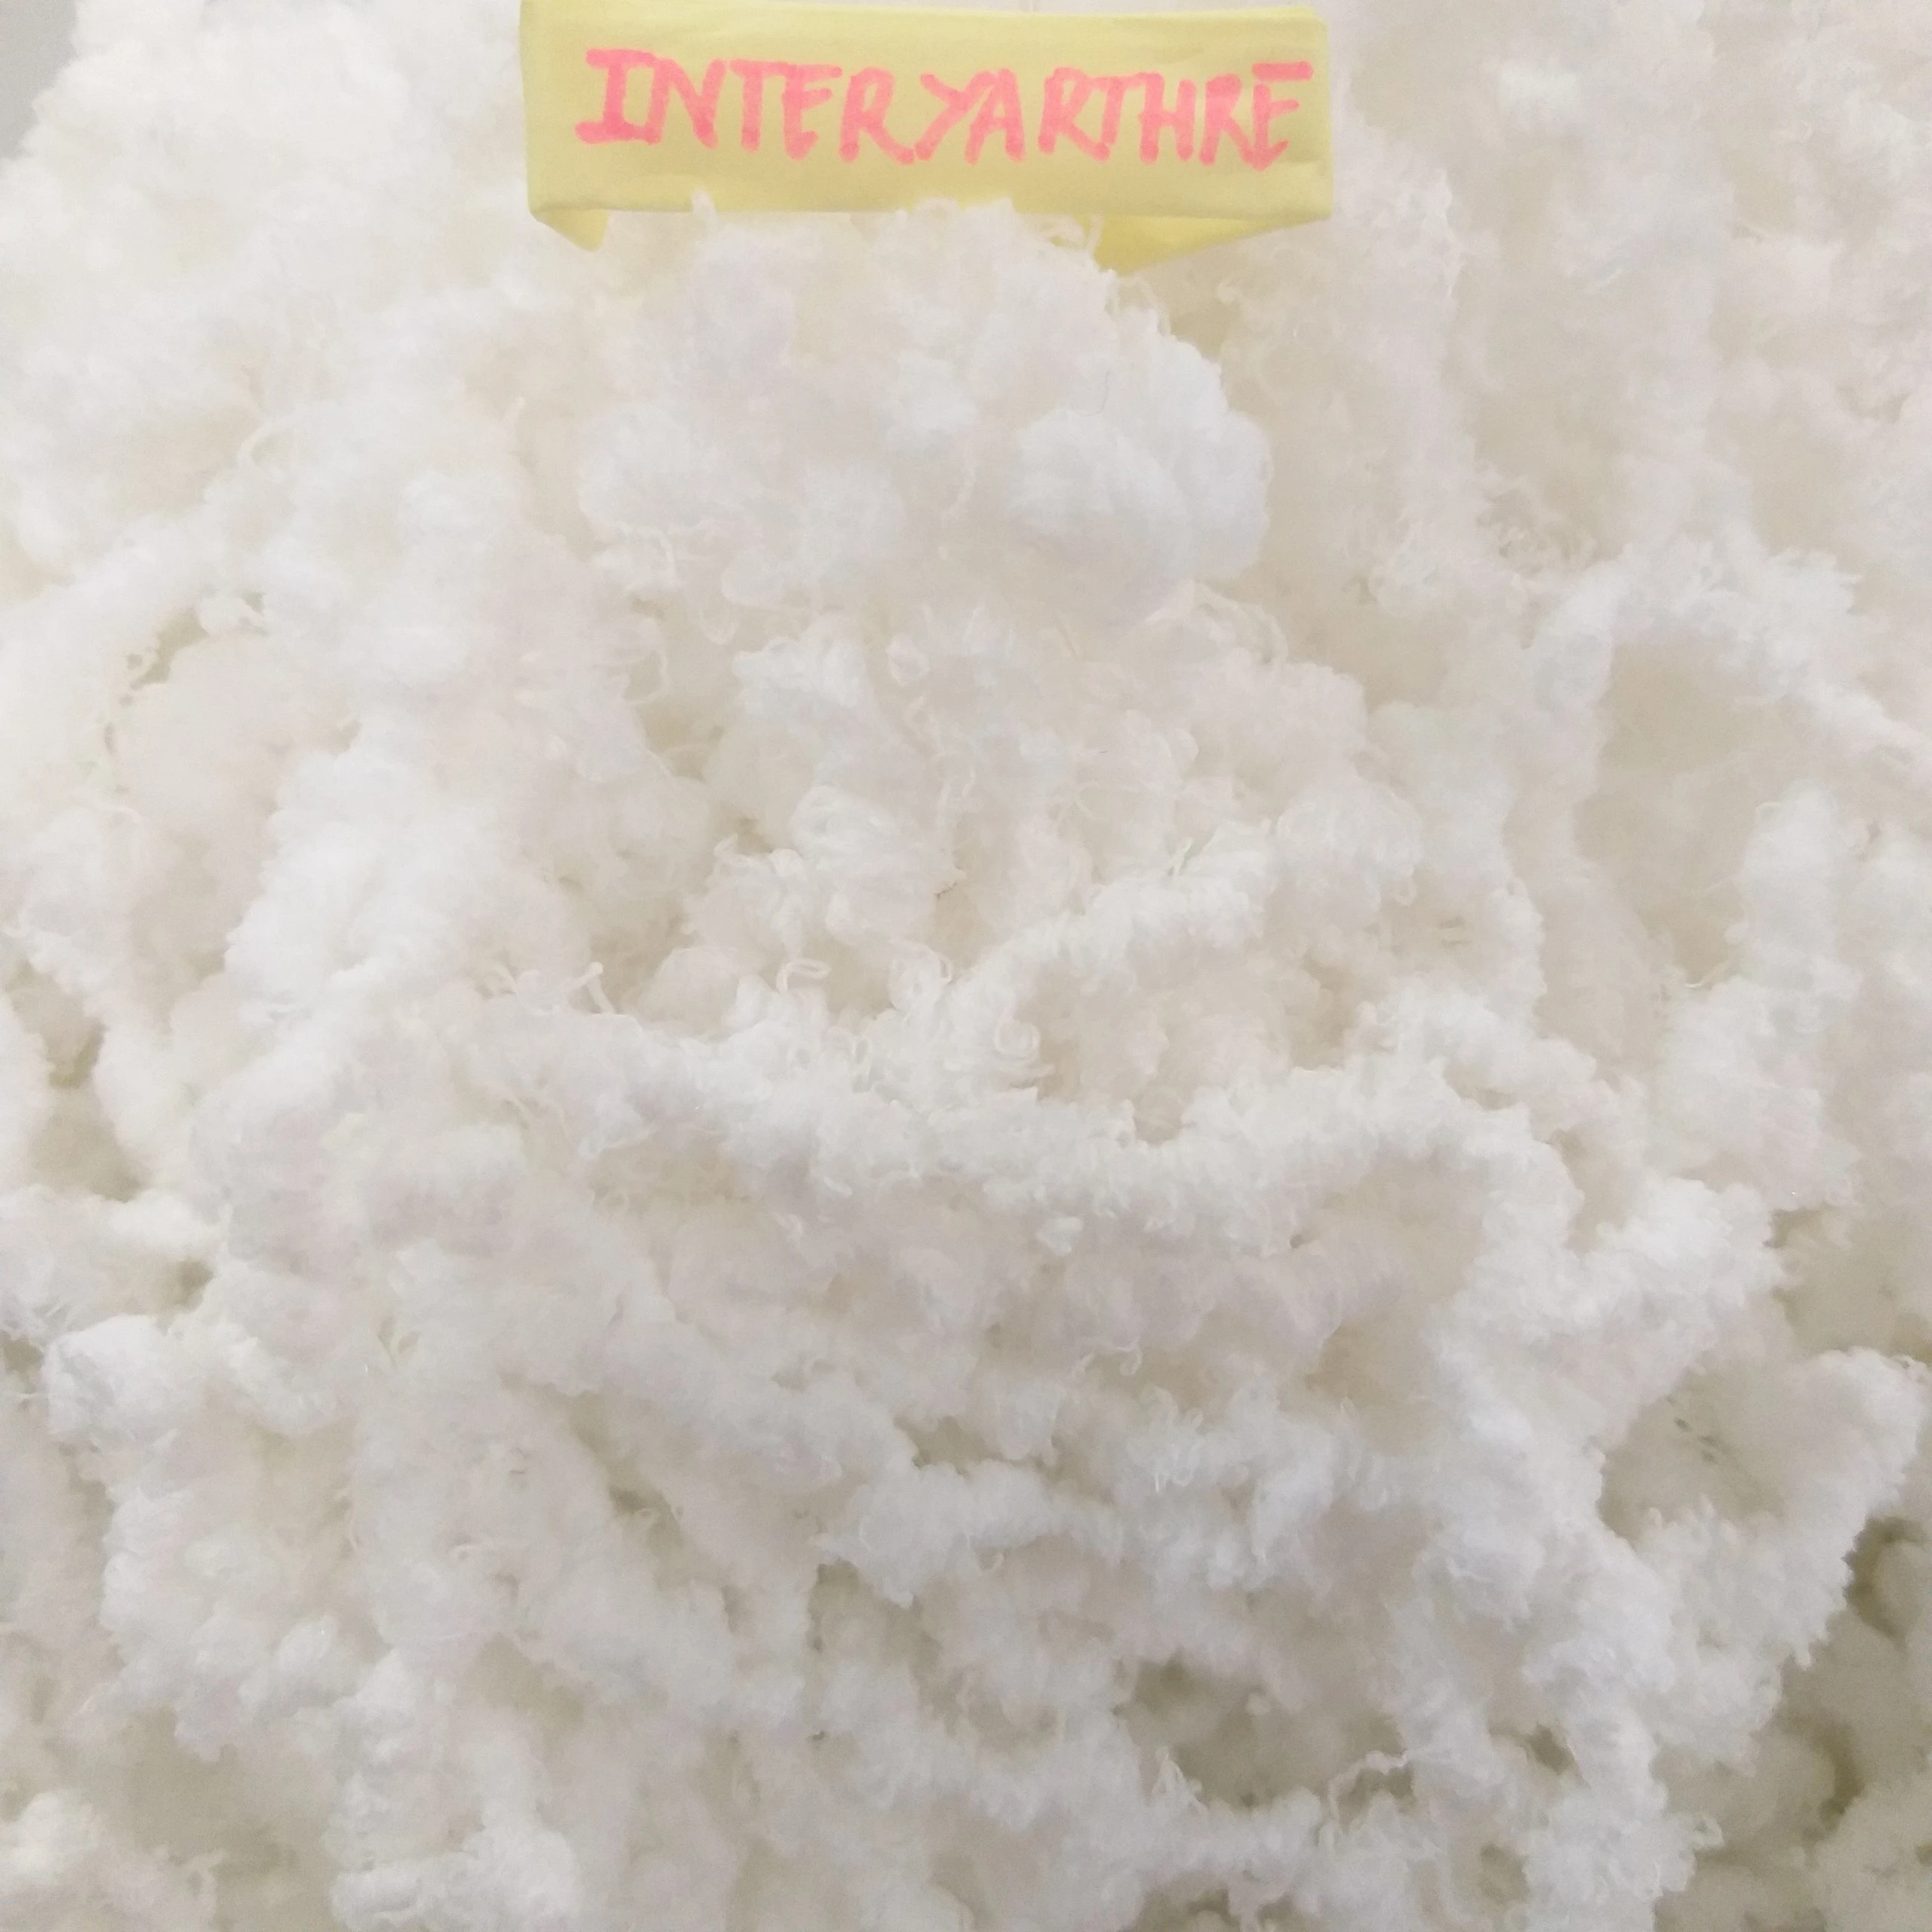 100% polyester - poy - dty yarn waste from textile waste for filling material/polyester pop corn  _Ms. Azura